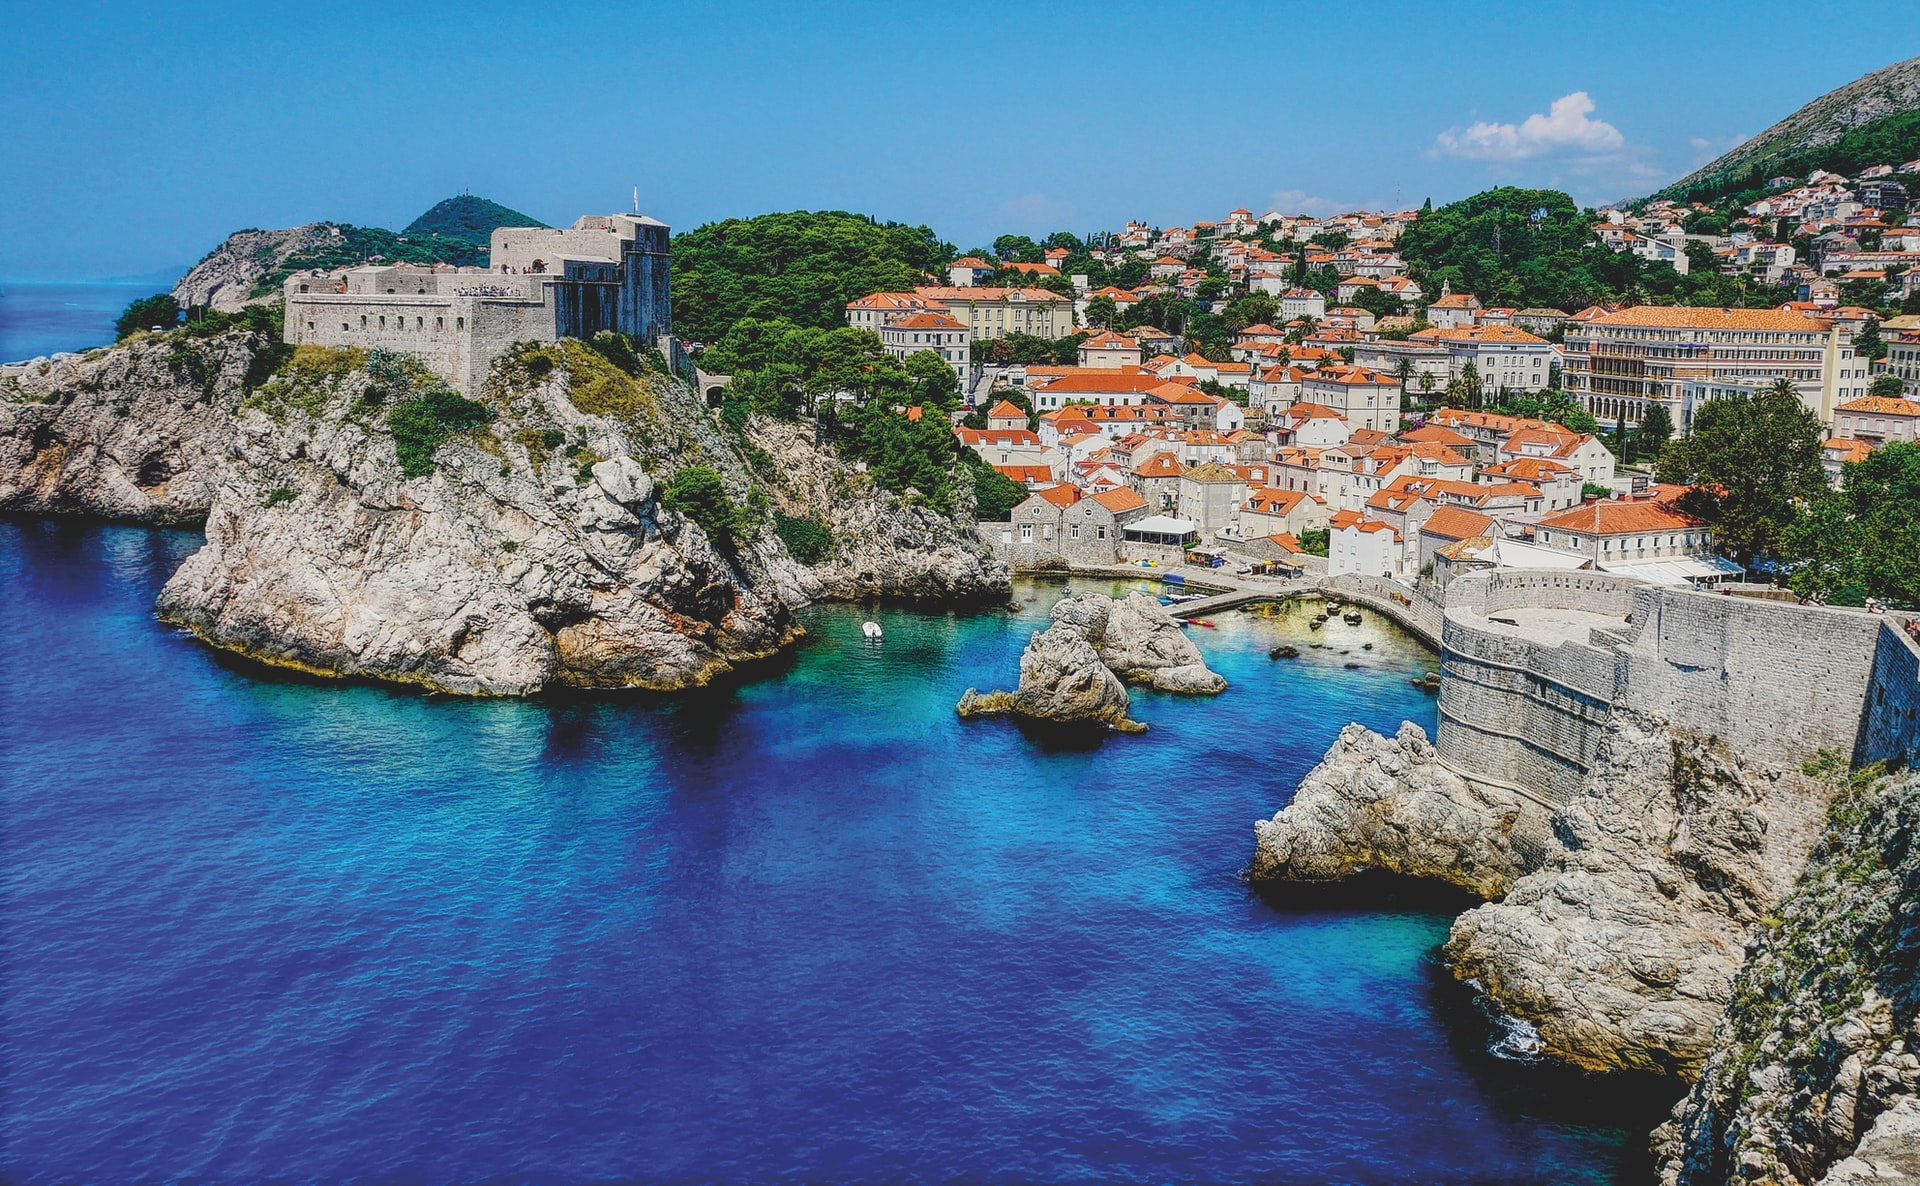 The Best of Croatia’s Natural Beauty